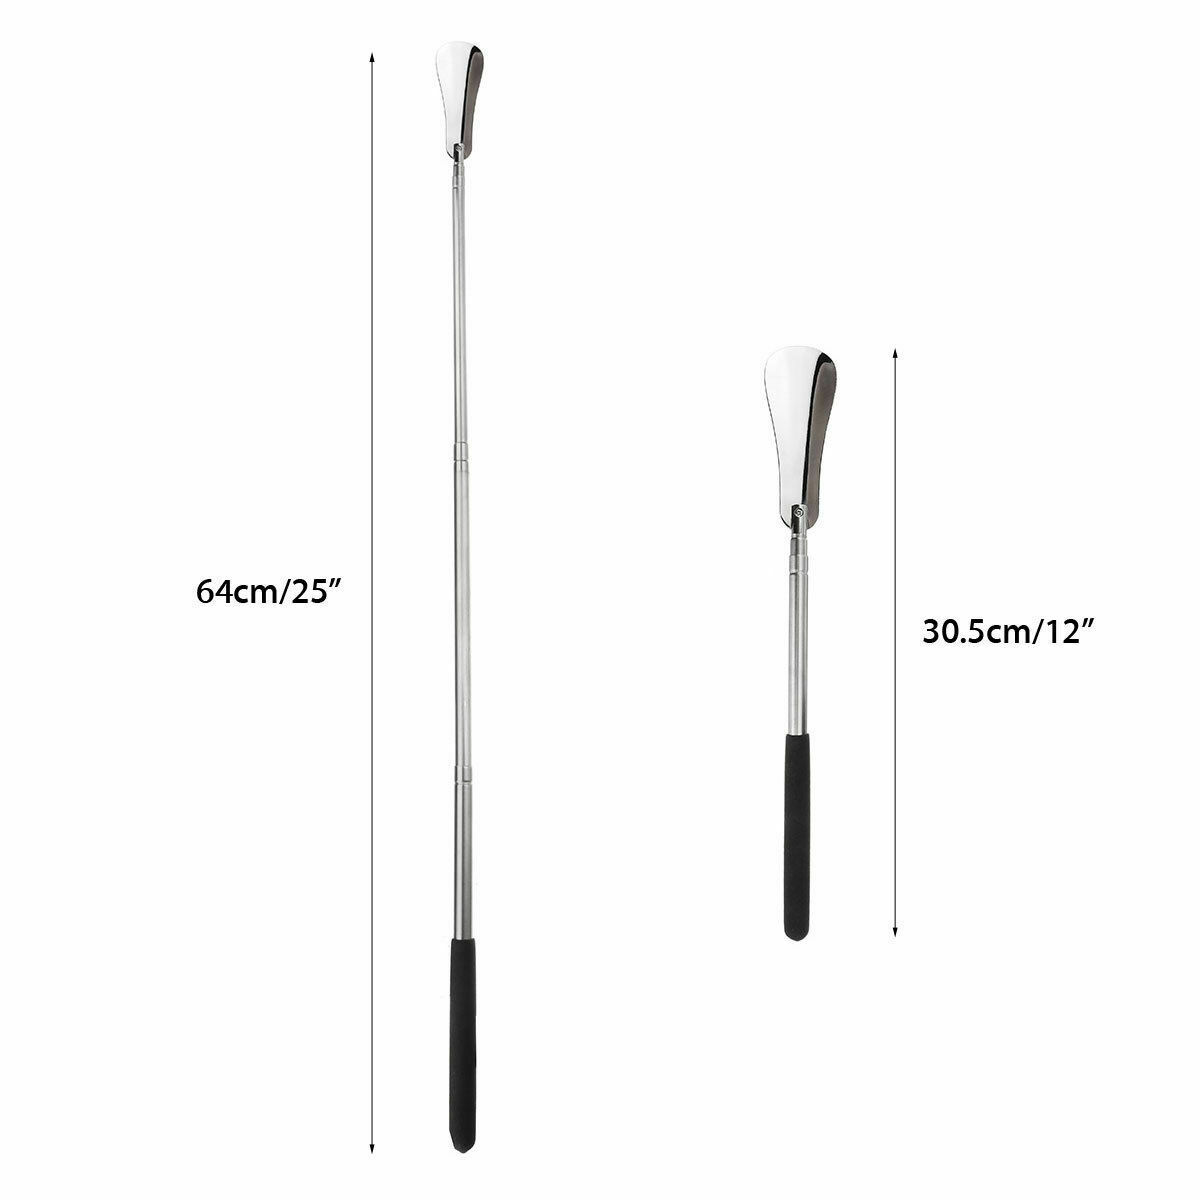 2019 New Extra Long Handle Shoe Horn Stainless Steel 25" Handled Metal Shoehorn Horns Useful Shoe Lifter Shoe Spoon Home Tools